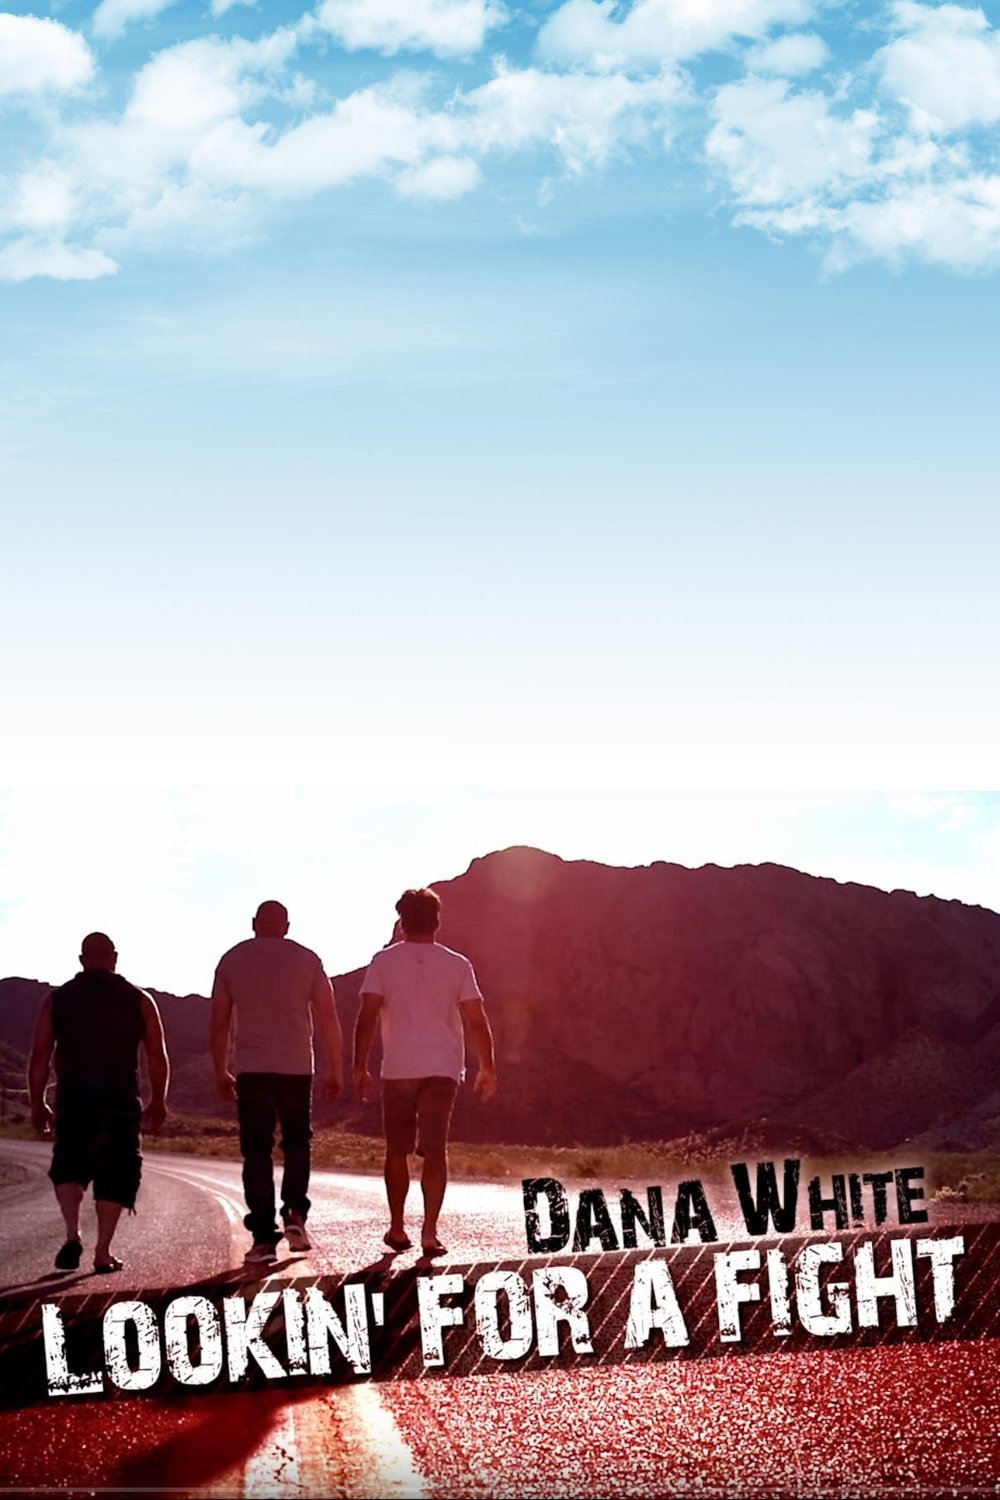 Poster of the movie Dana White: Lookin' for a Fight